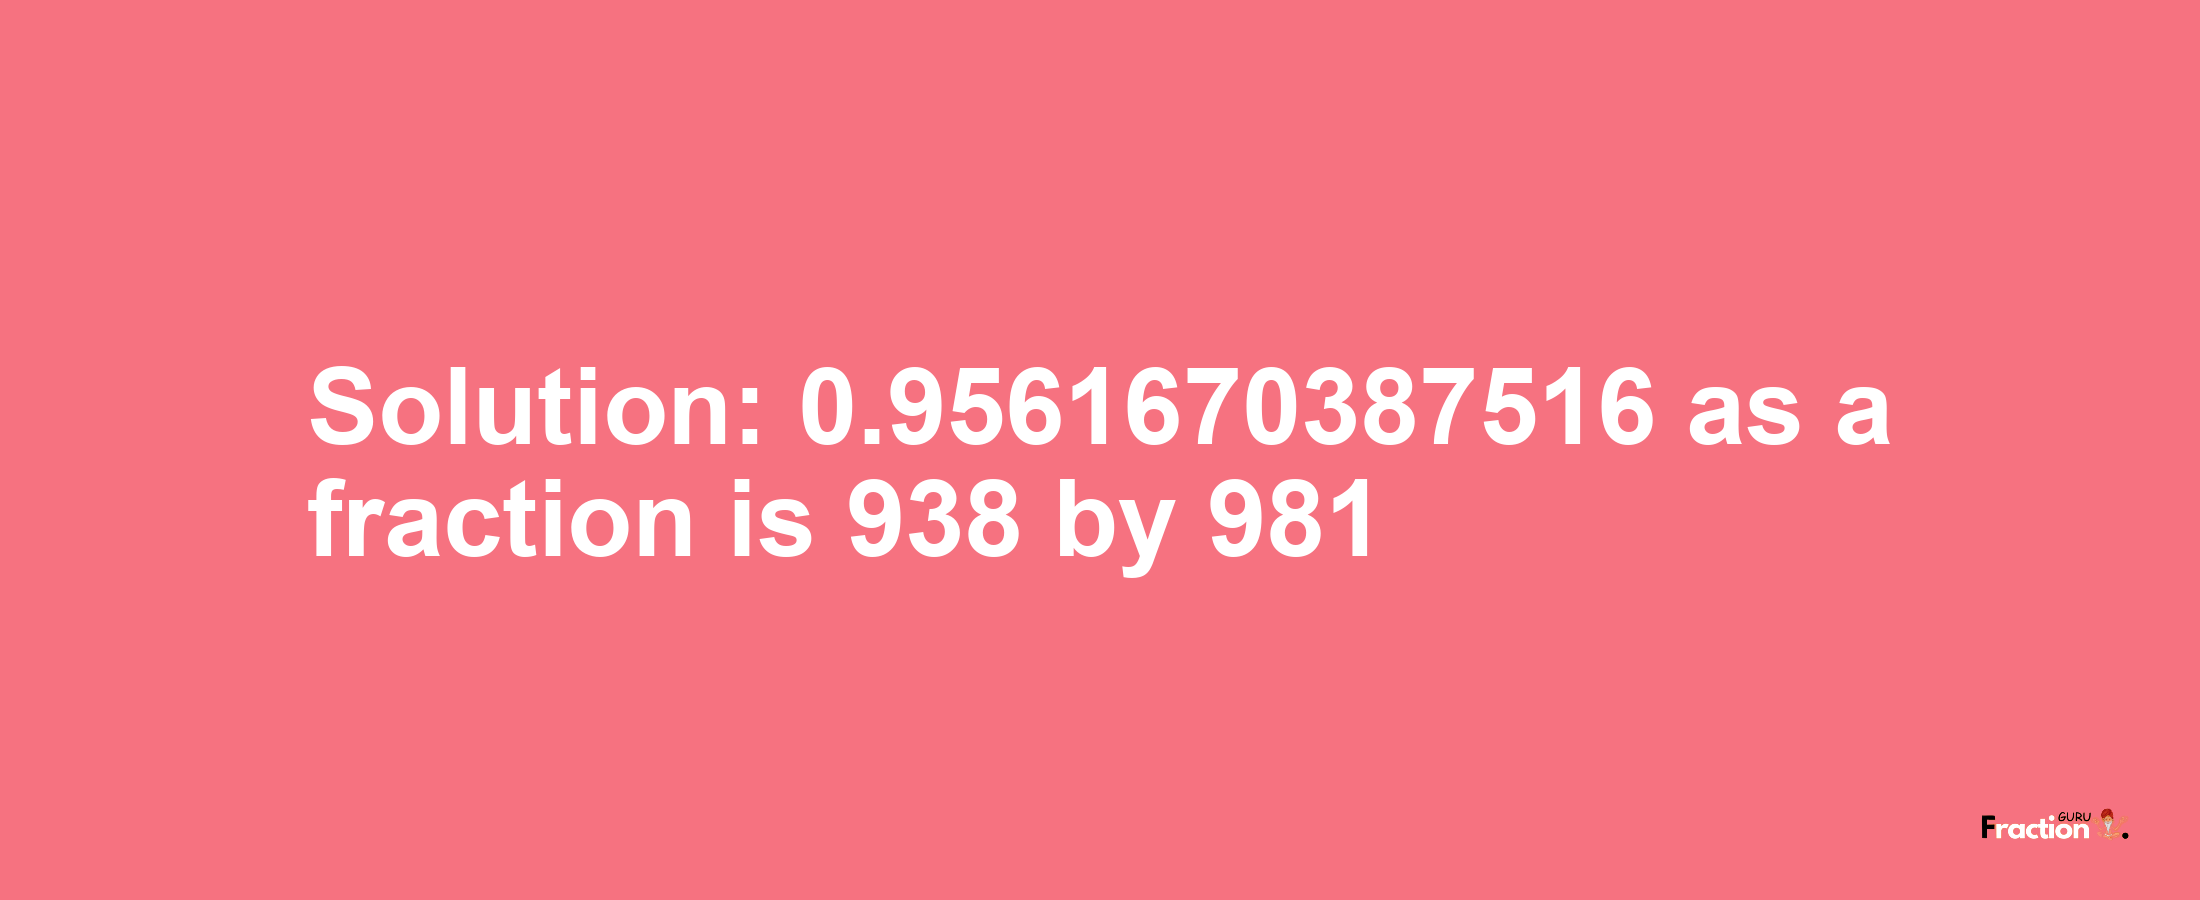 Solution:0.9561670387516 as a fraction is 938/981